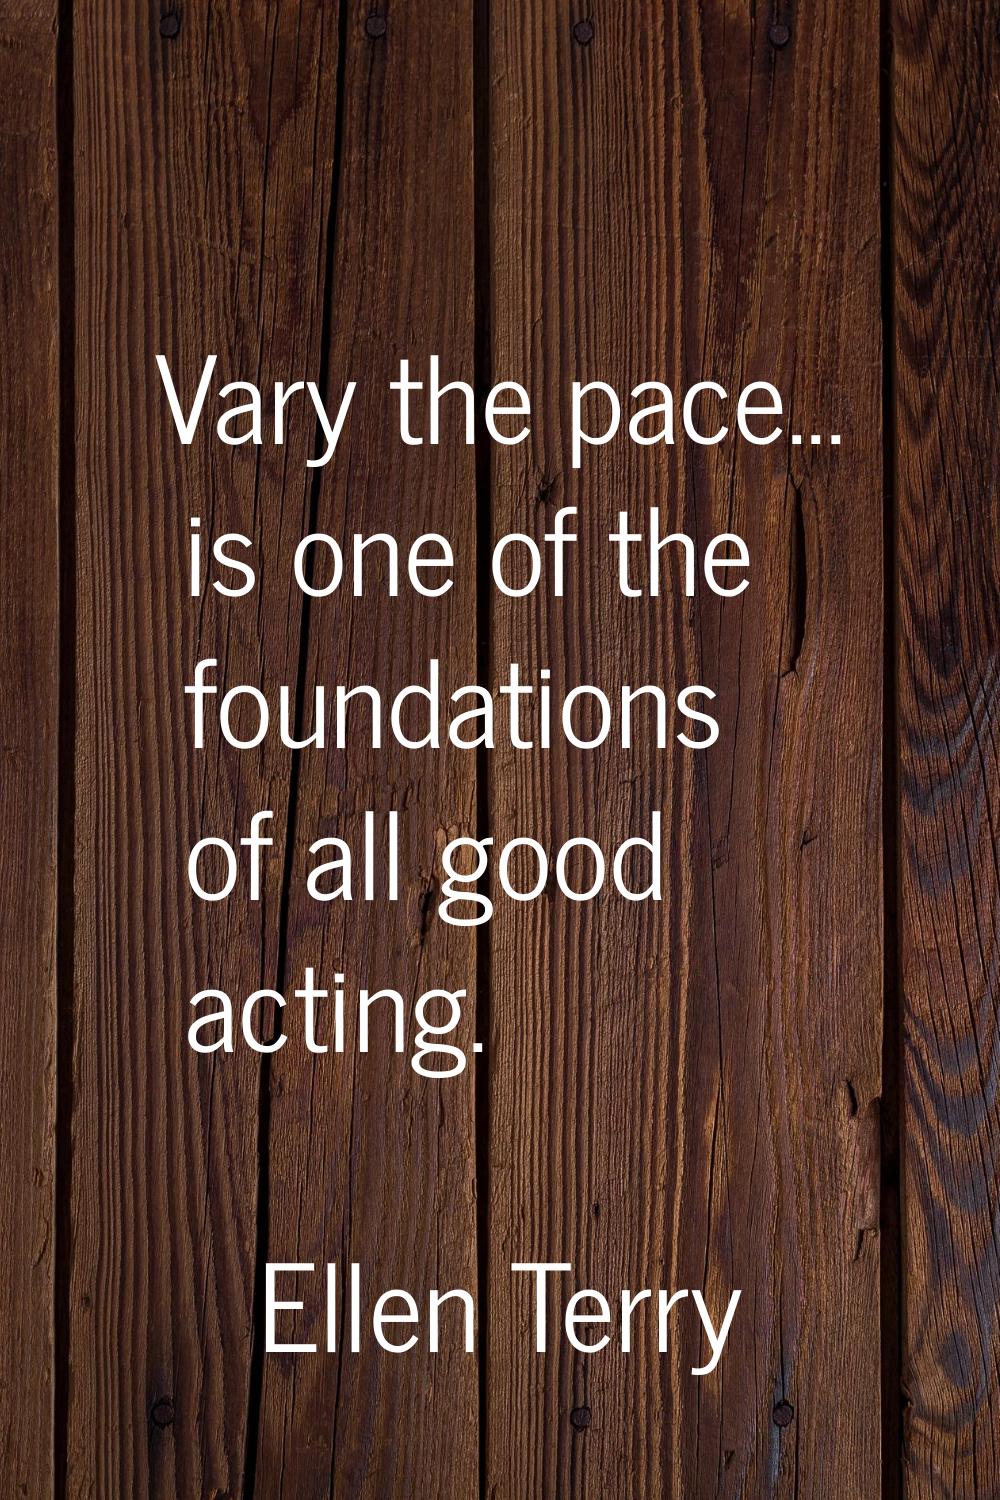 Vary the pace... is one of the foundations of all good acting.